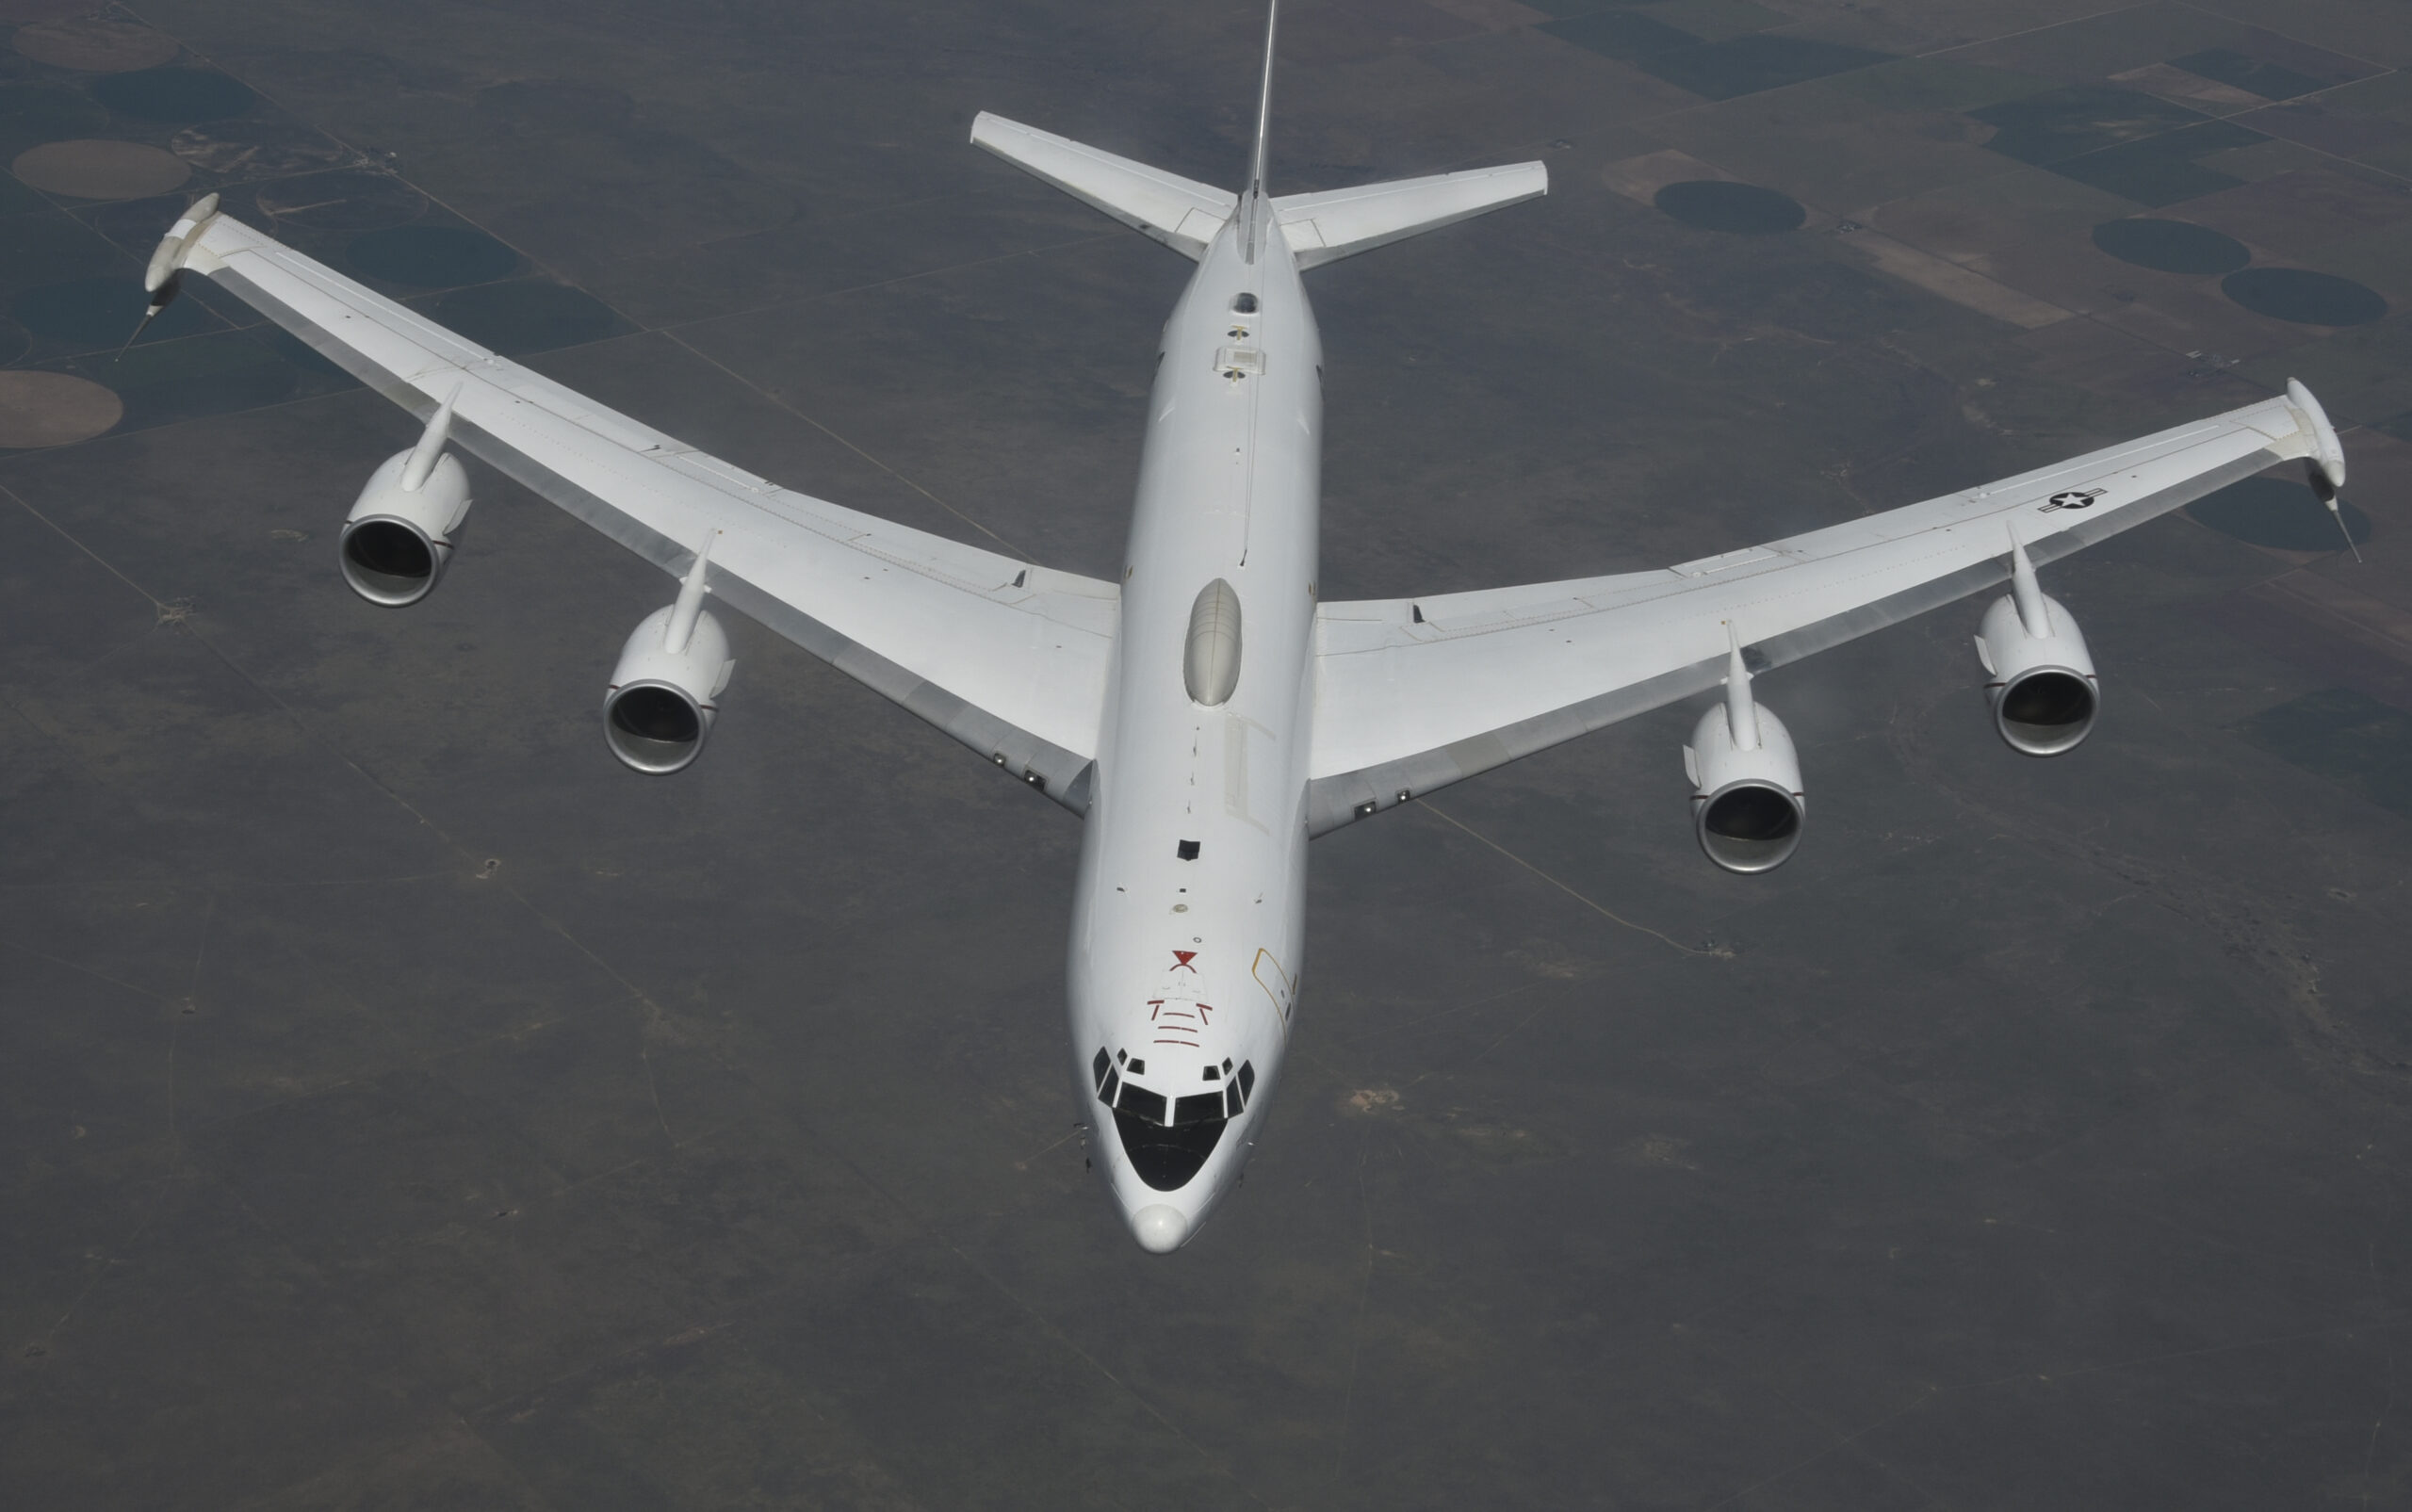 US Air Force awards Boeing first contract for fleet of 26 E-7 aircraft